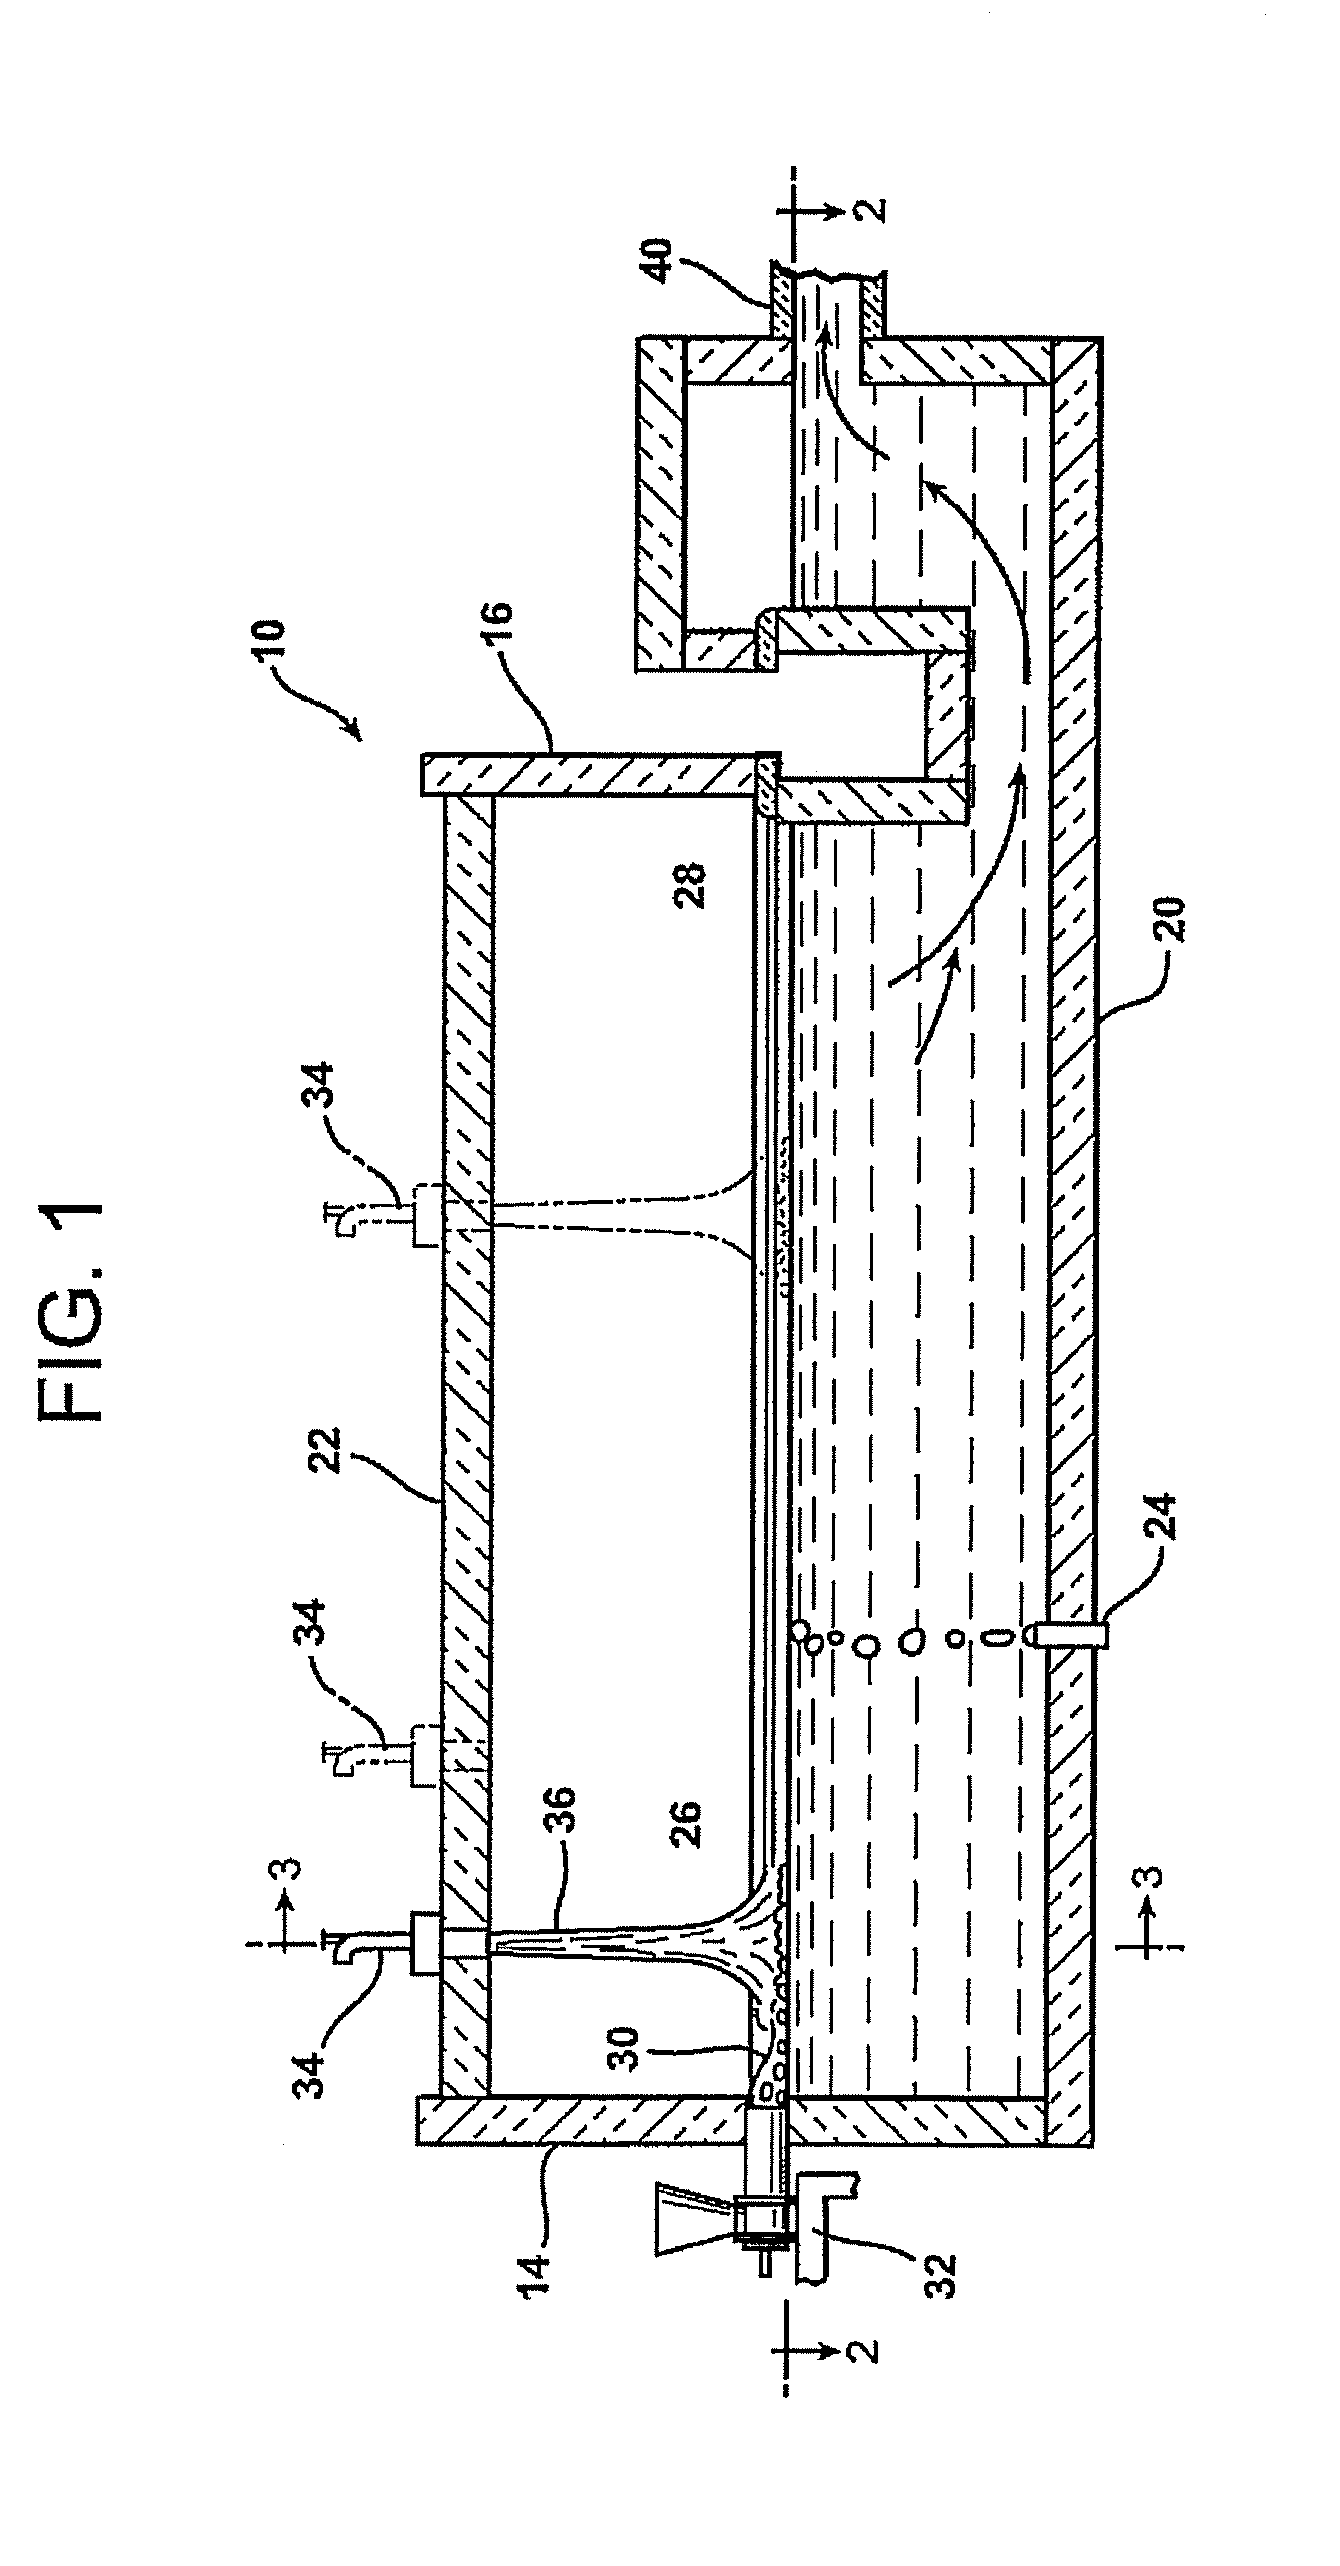 Method of manufacturing s-glass fibers in a direct melt operation and products formed therefrom